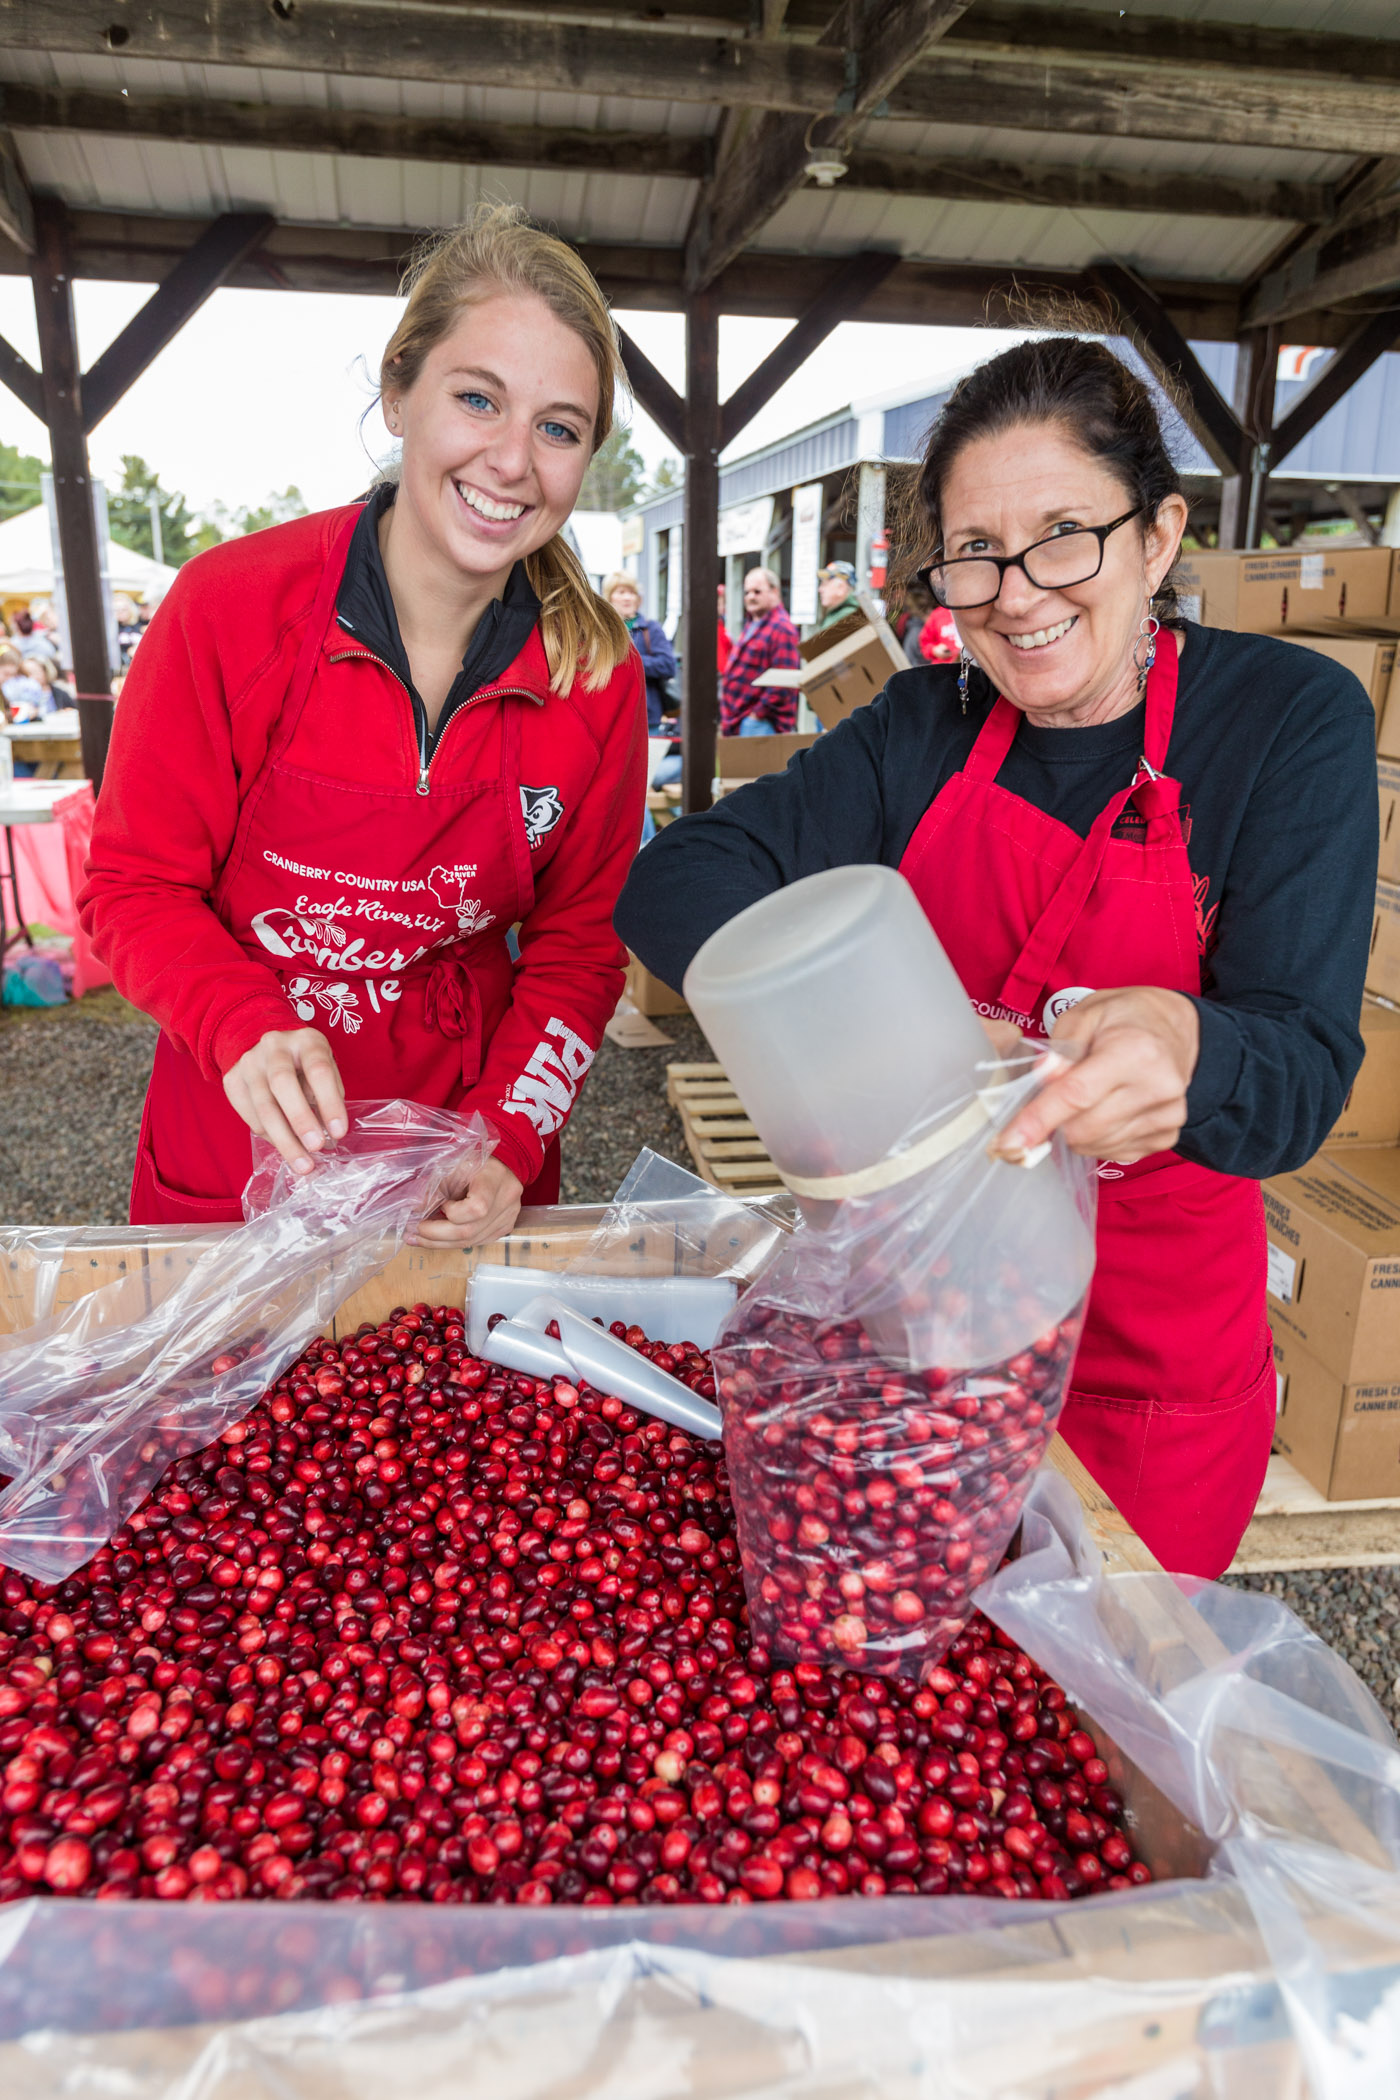 Cranberry Fest celebrates 40th Anniversary in Eagle River this weekend